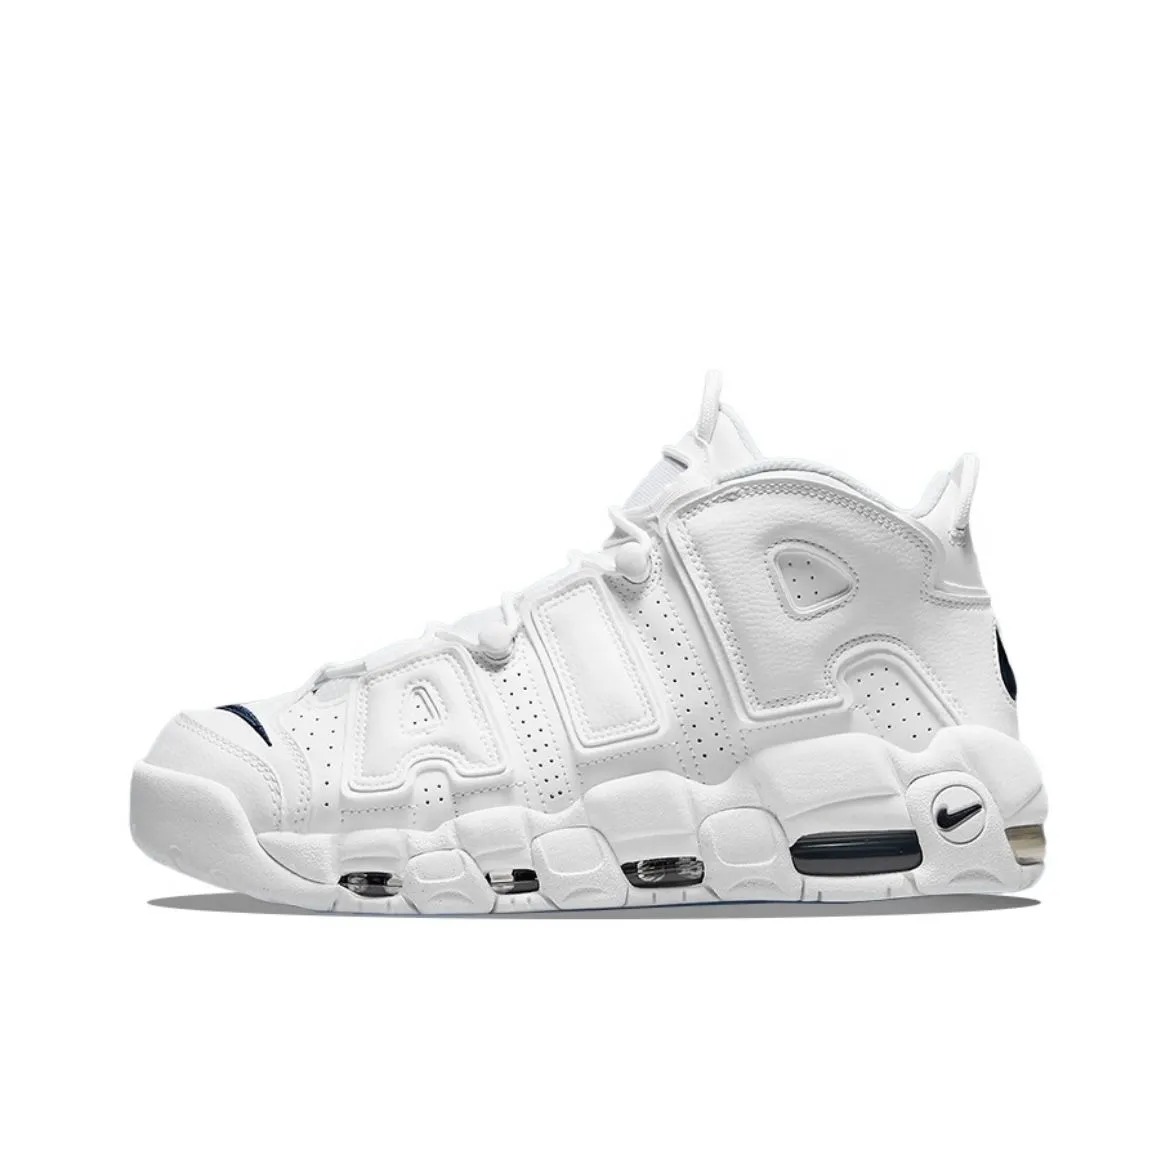 👟US$91.96😄Reps More Uptempo Sneakers

#nike #repsshoes #shoesreps #replicamenshoes #replicashoes #menshoes #weereplica #nikedunk #sneakers #shoes #fashionshoes #replicaretailvendors #retailshoes #retail #retailr #retailmenshoes #fashion